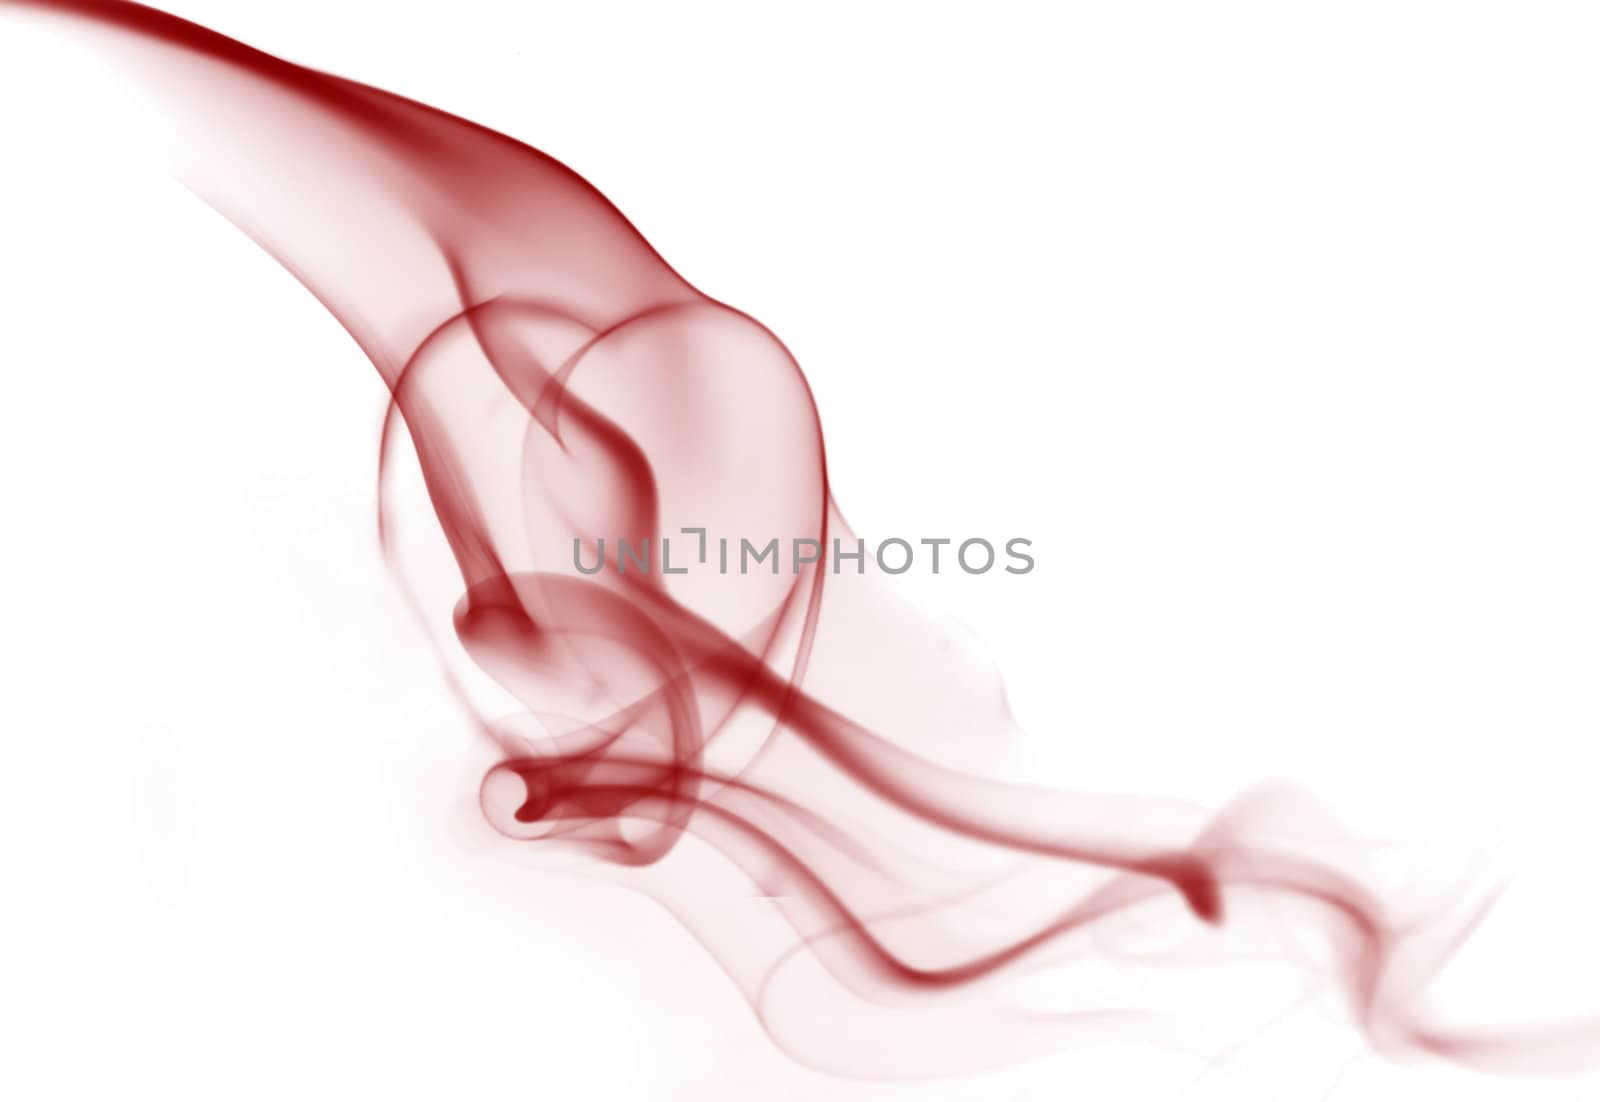 Abstract heart image formed by smoke trails frozen with off camera flash